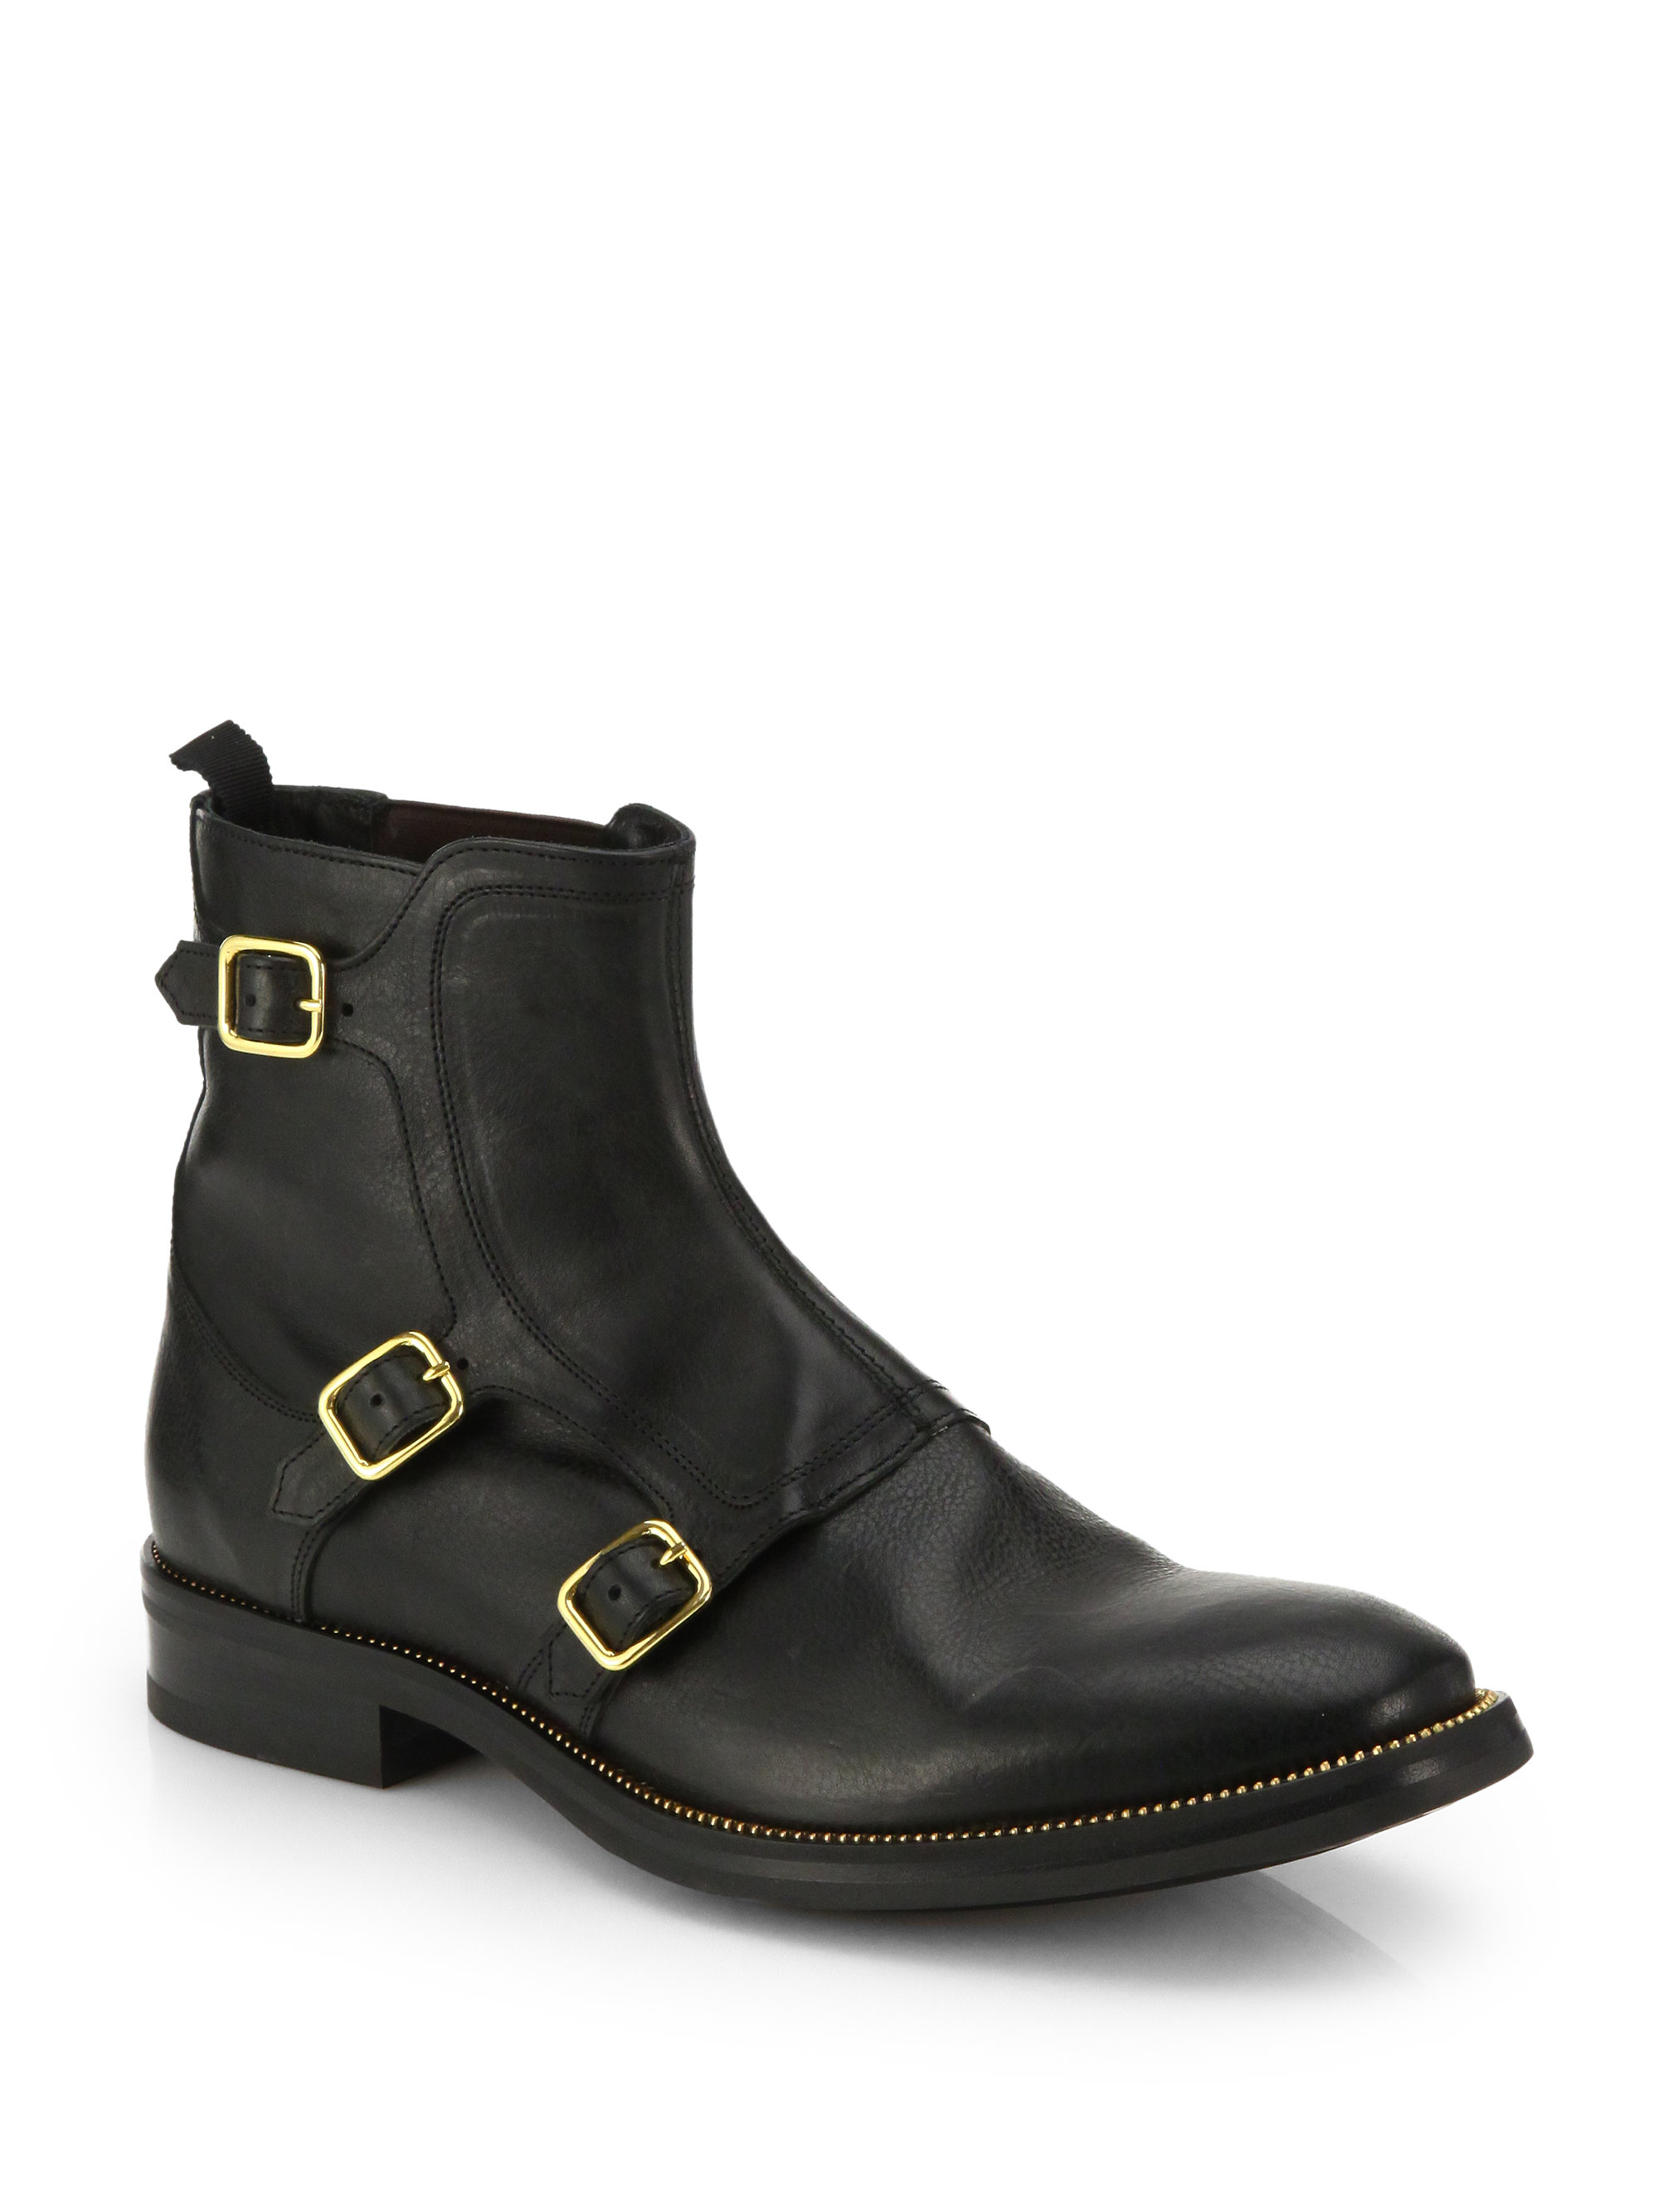 Alexander Mcqueen Three-Buckle Leather Ankle Boots in Black for Men | Lyst